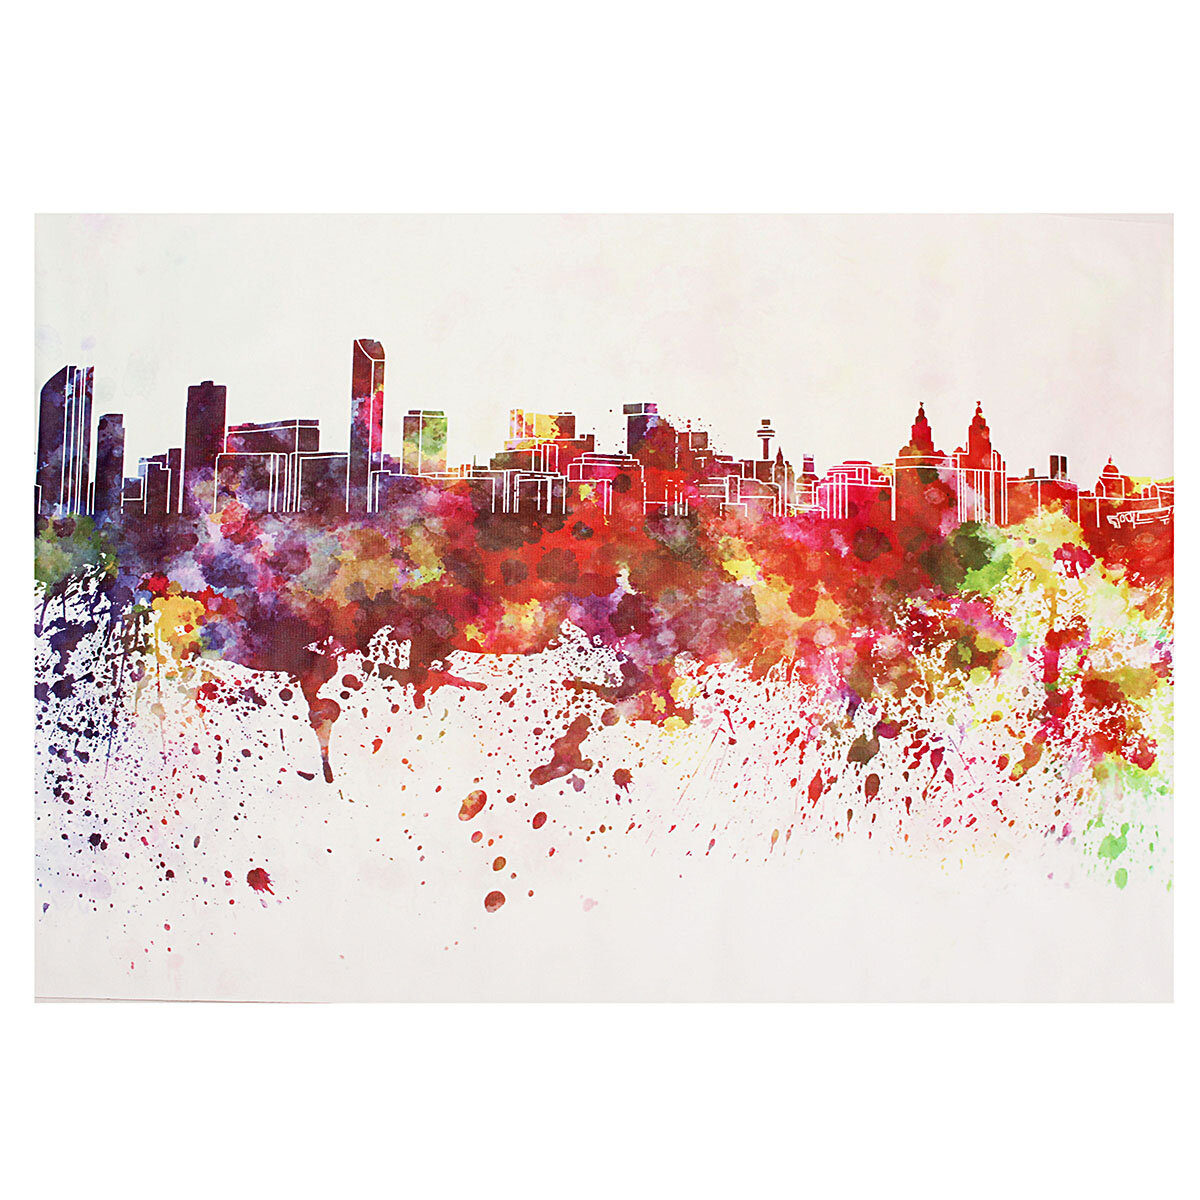 DIY Art Painting Color City Building Painting Canvas Decor Home Decoration Wall Pictures Living Room Wall Home Decor